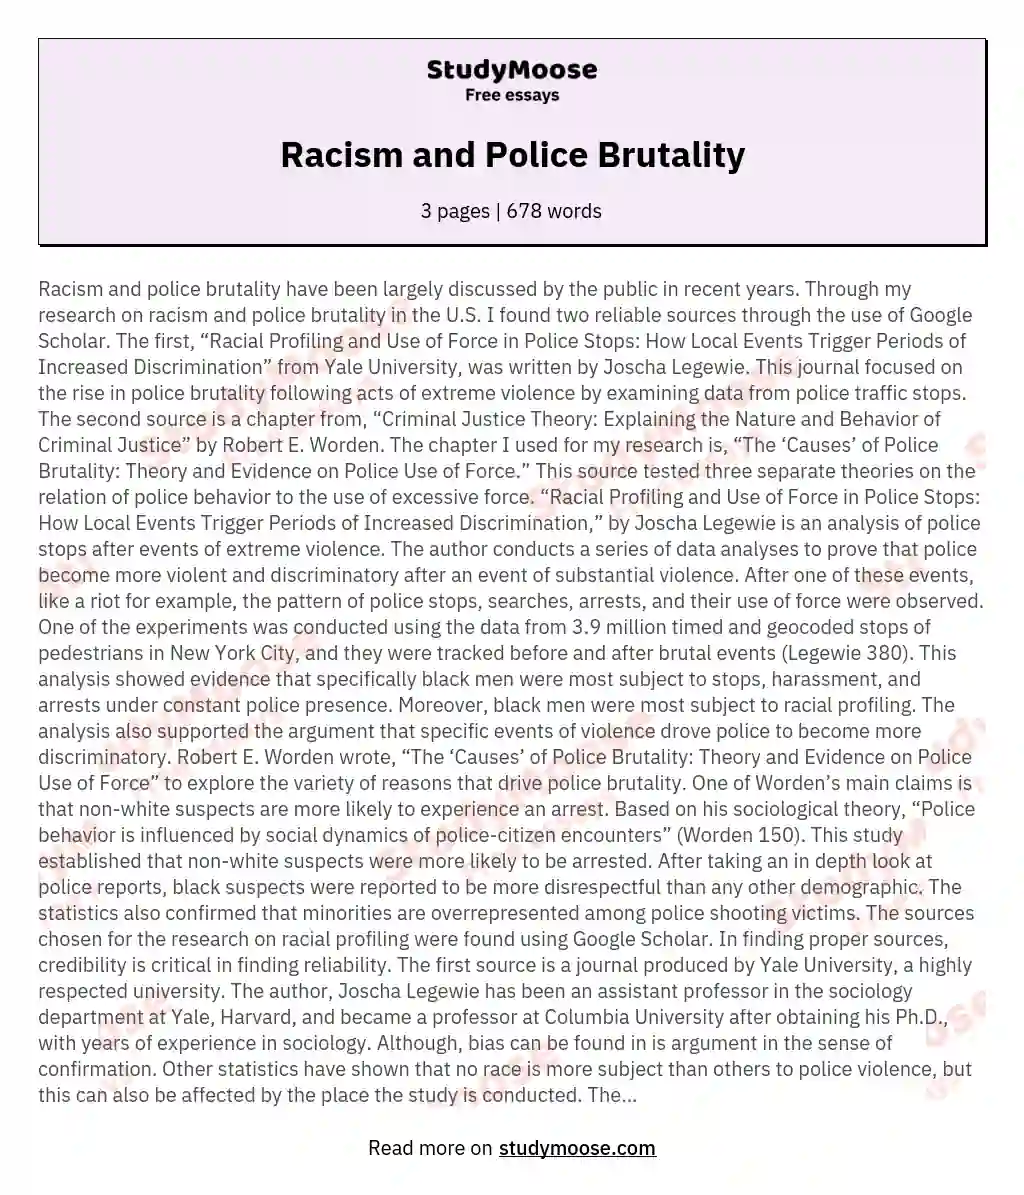 Racism and Police Brutality